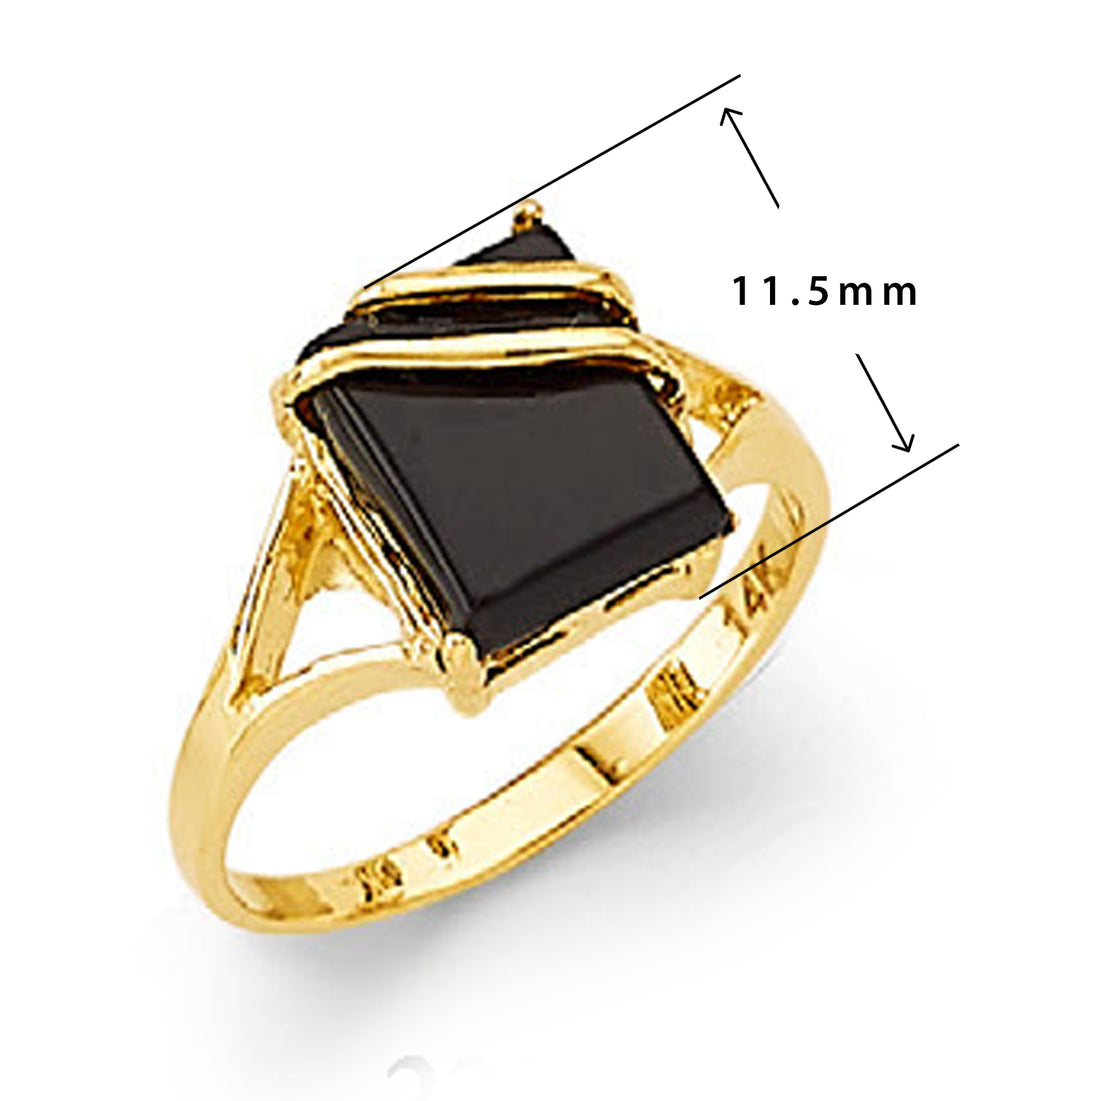 Quirky Onyx Ring in Solid Gold with Measurement